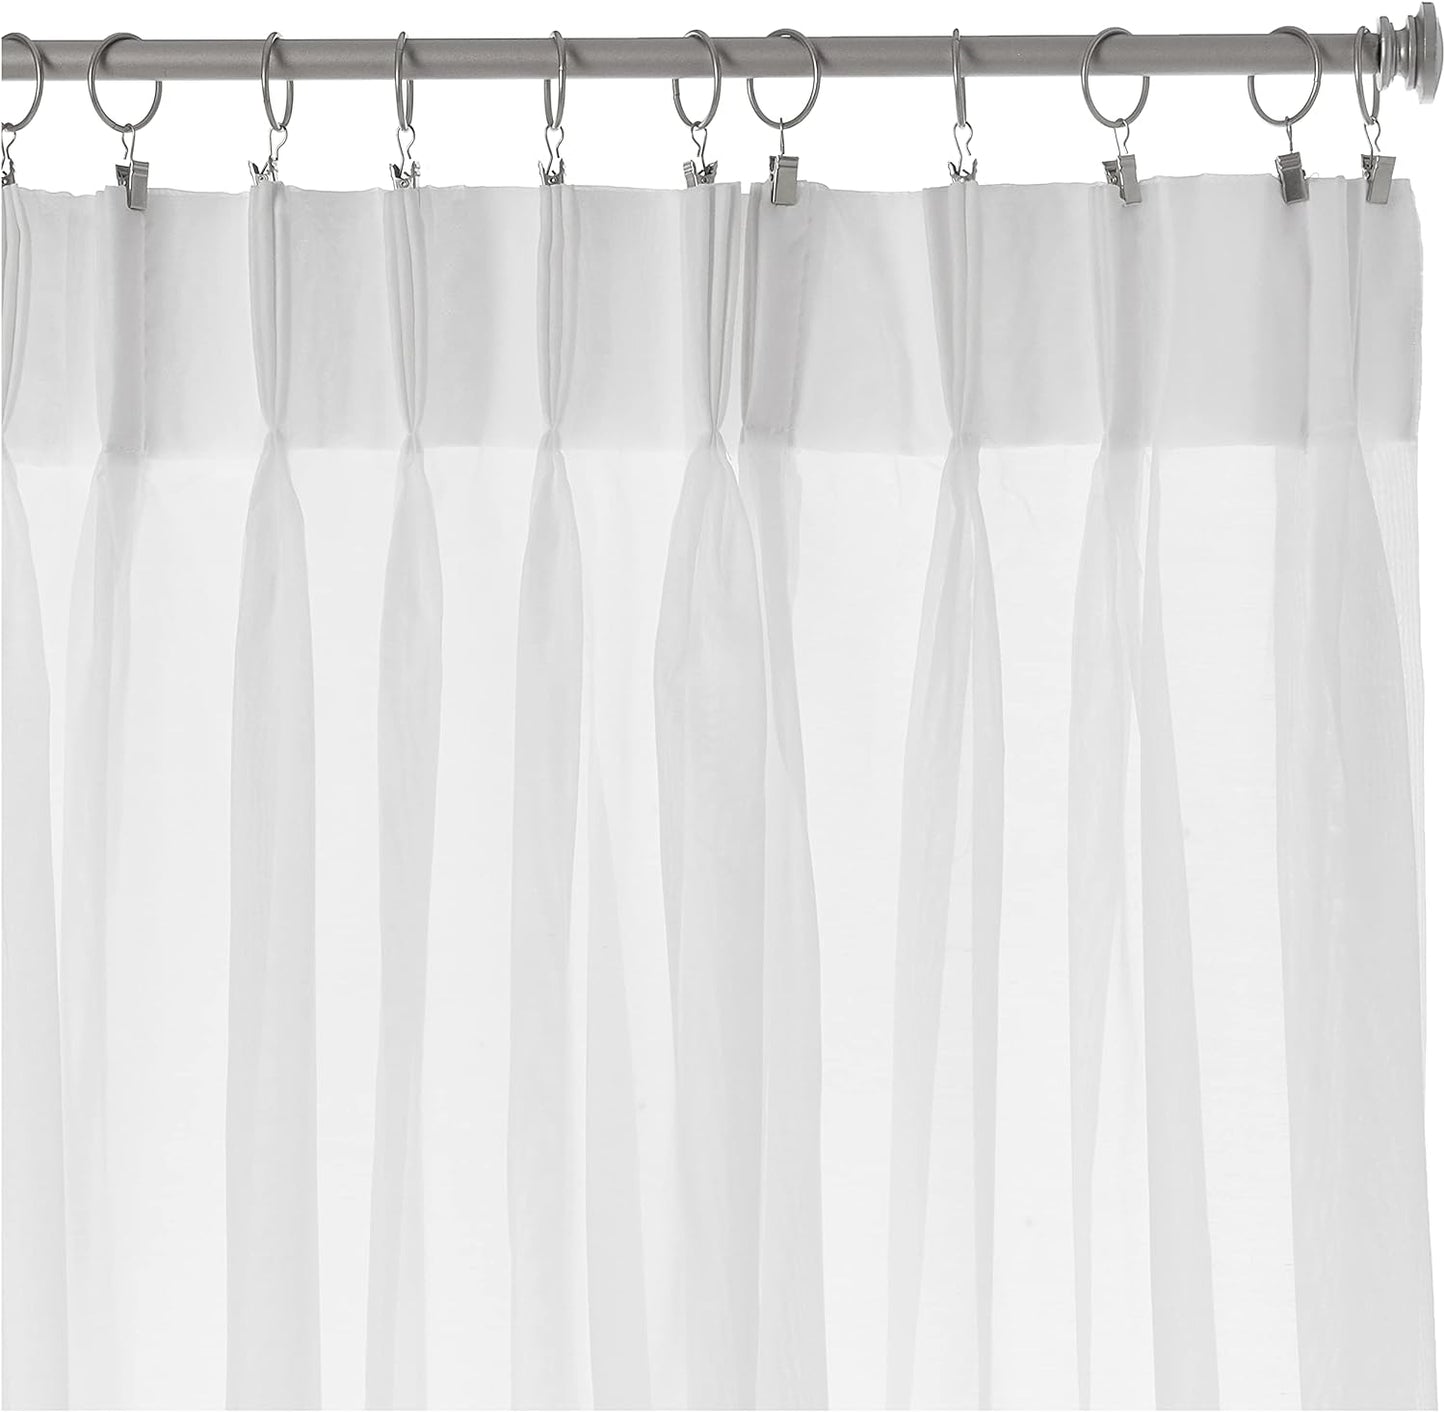 Stylemaster Splendor Pinch Pleated Drapes Pair, 2 of 60" by 84", White  Stylemaster Home Products   